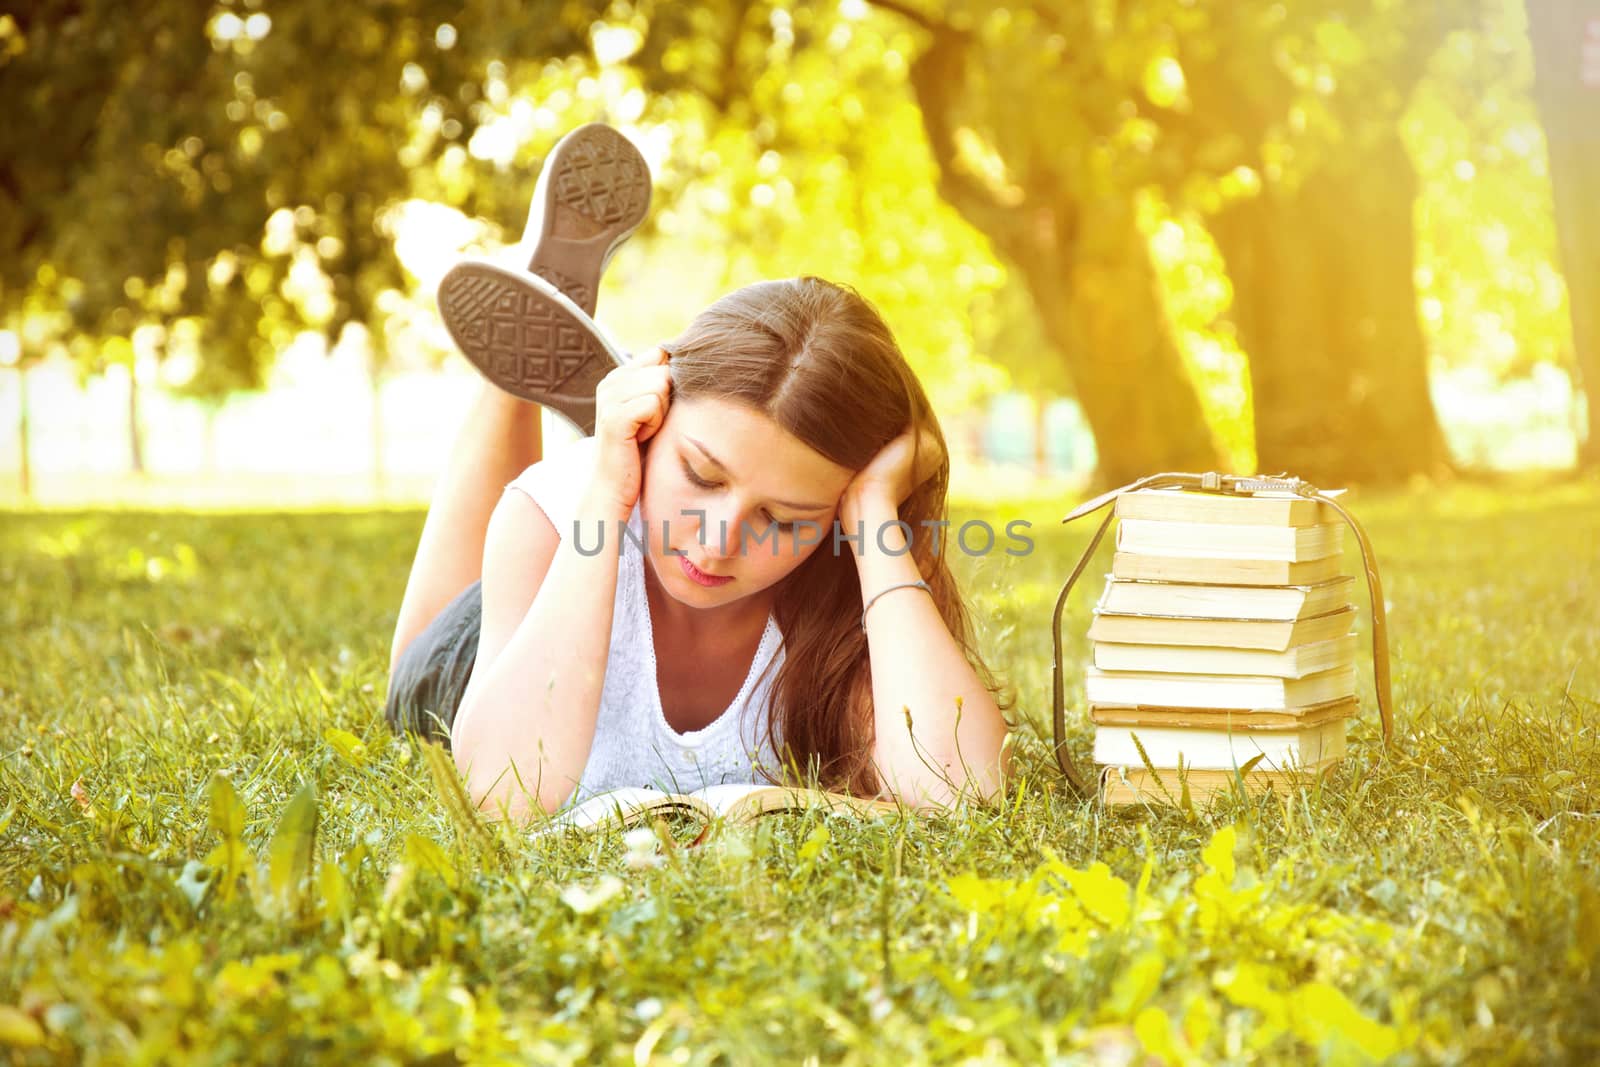 Young beautiful college student girl lying down on the green grass and reading a book at campus at warm day. Education. Back to school conceptual image.